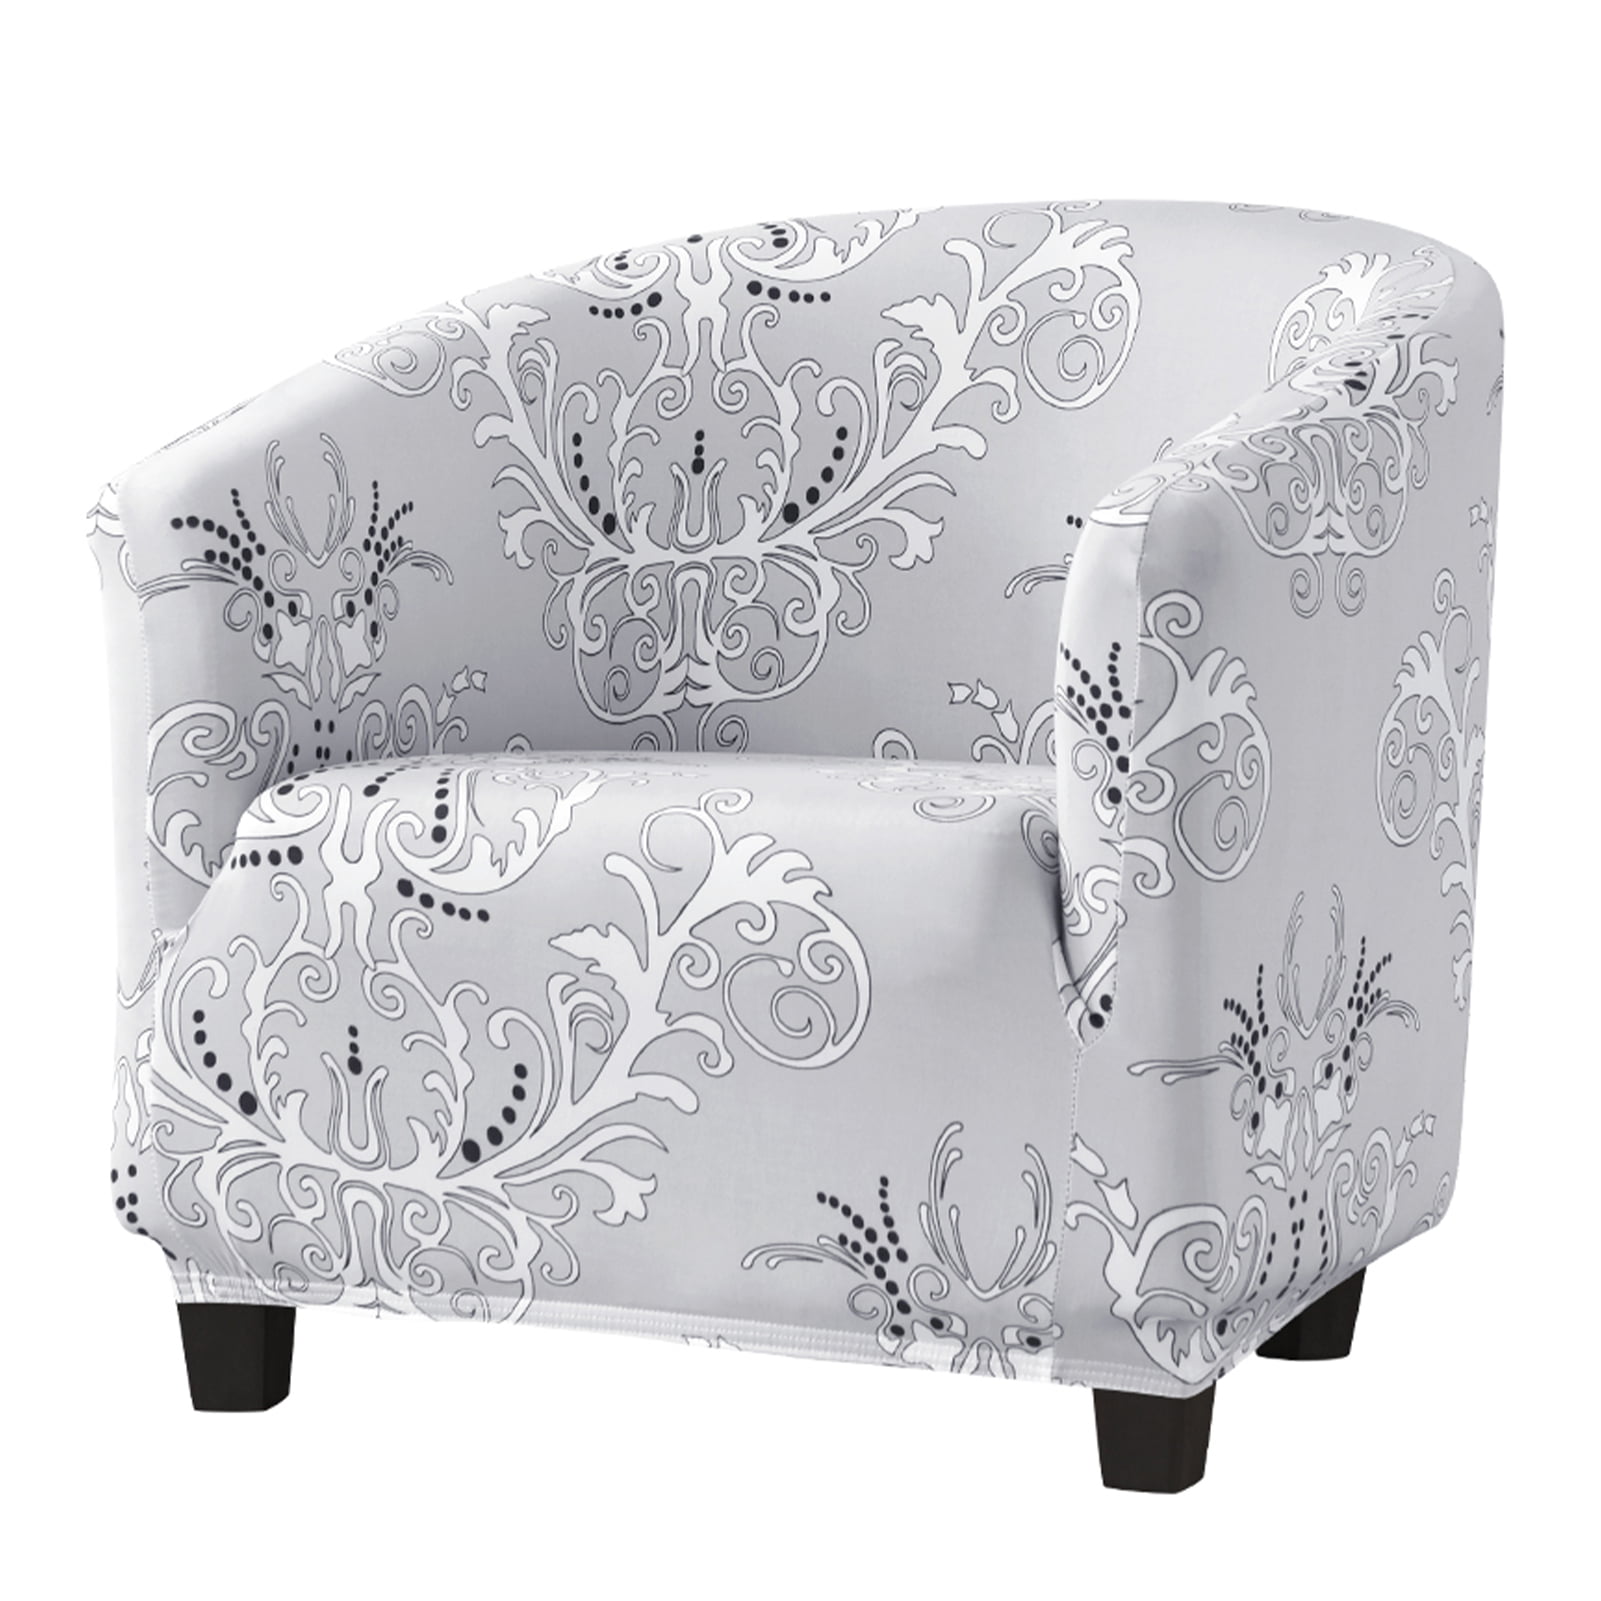 Chair,Gray TIKAMI Printed Floral Couch Slipcovers Stretch Sofa Covers for Living Room Washable Anti-Slip Furniture Protector